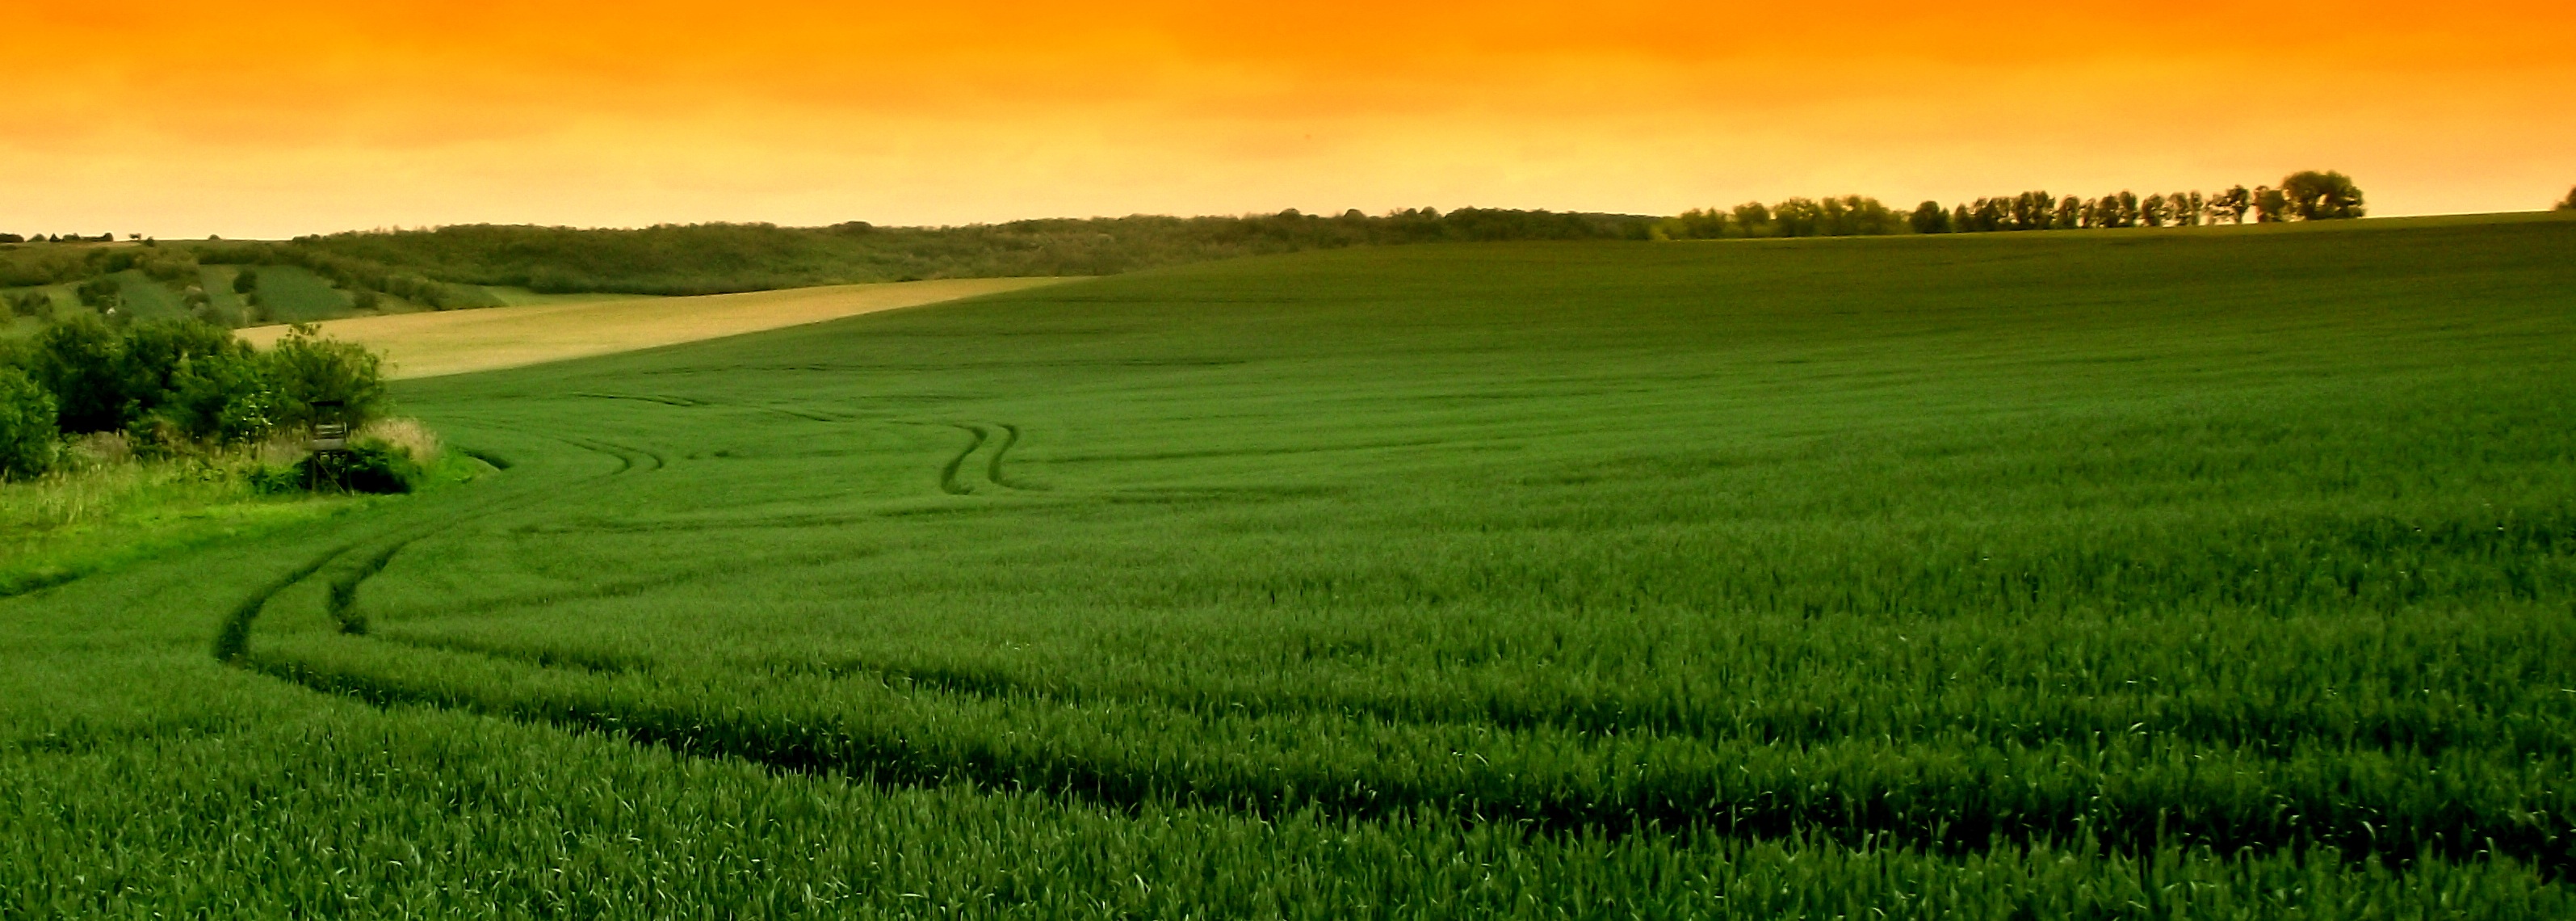 Green Wheat field summer panorama free image download